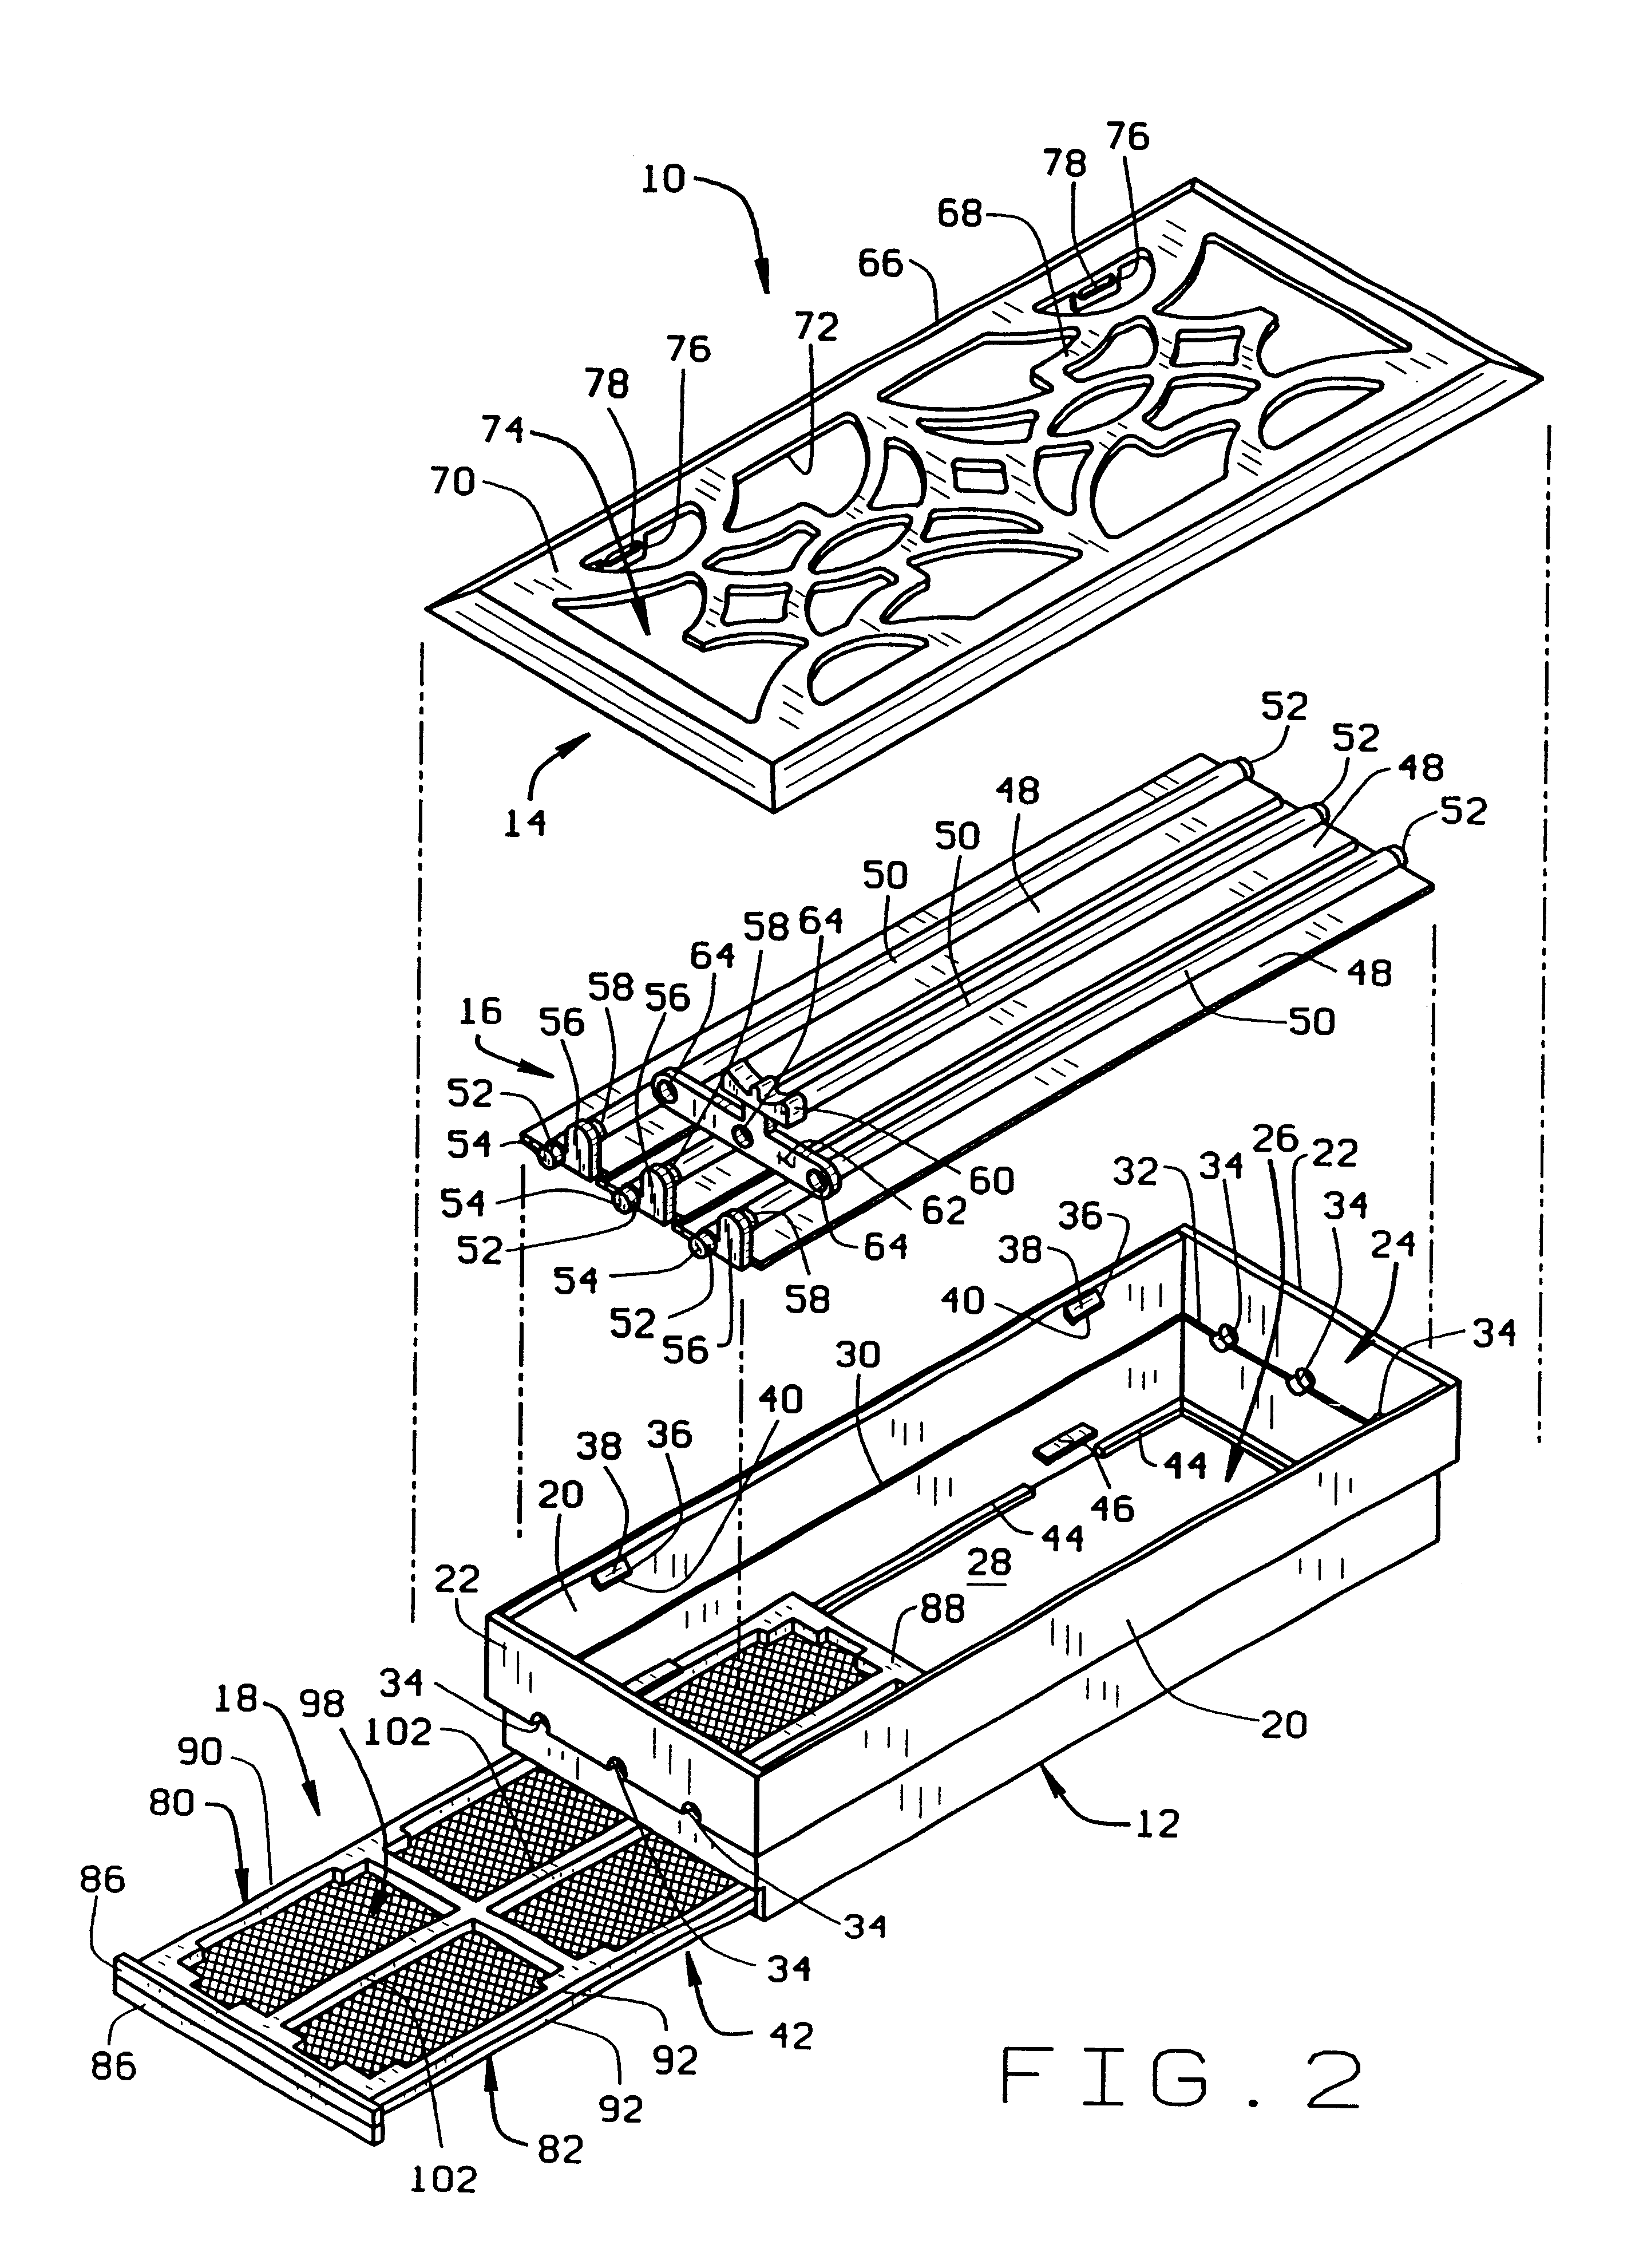 Register assembly for covering an air duct opening